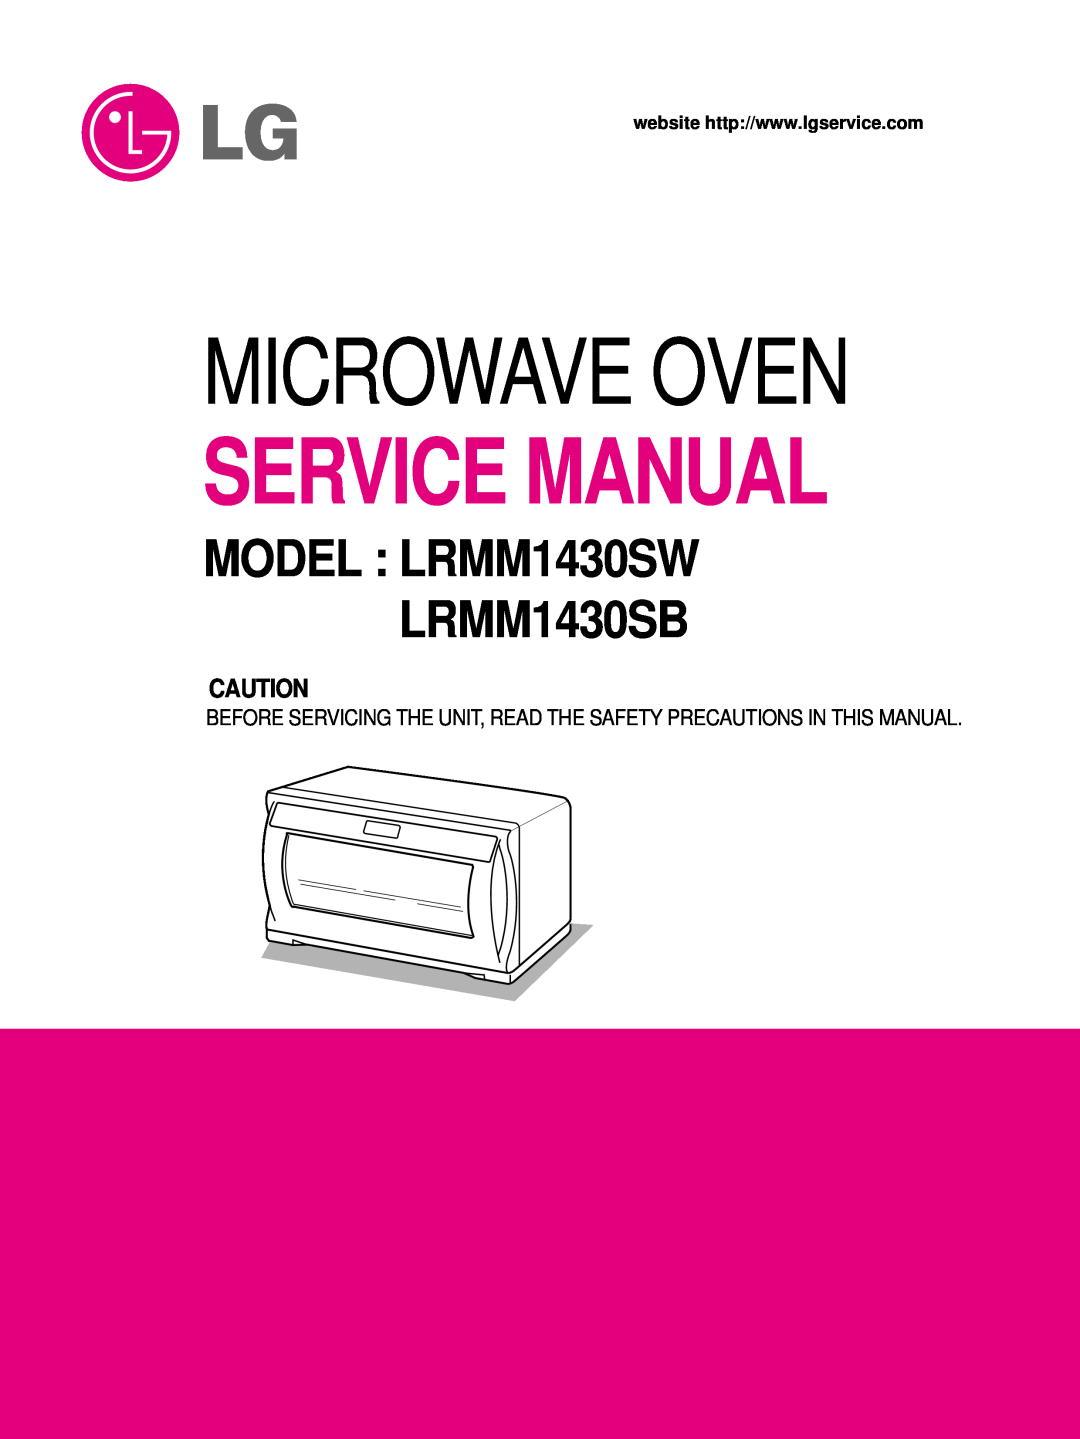 LG Electronics LRMM1430SB manual Before Servicing The Unit, Read The Safety Precautions In This Manual, Microwave Oven 